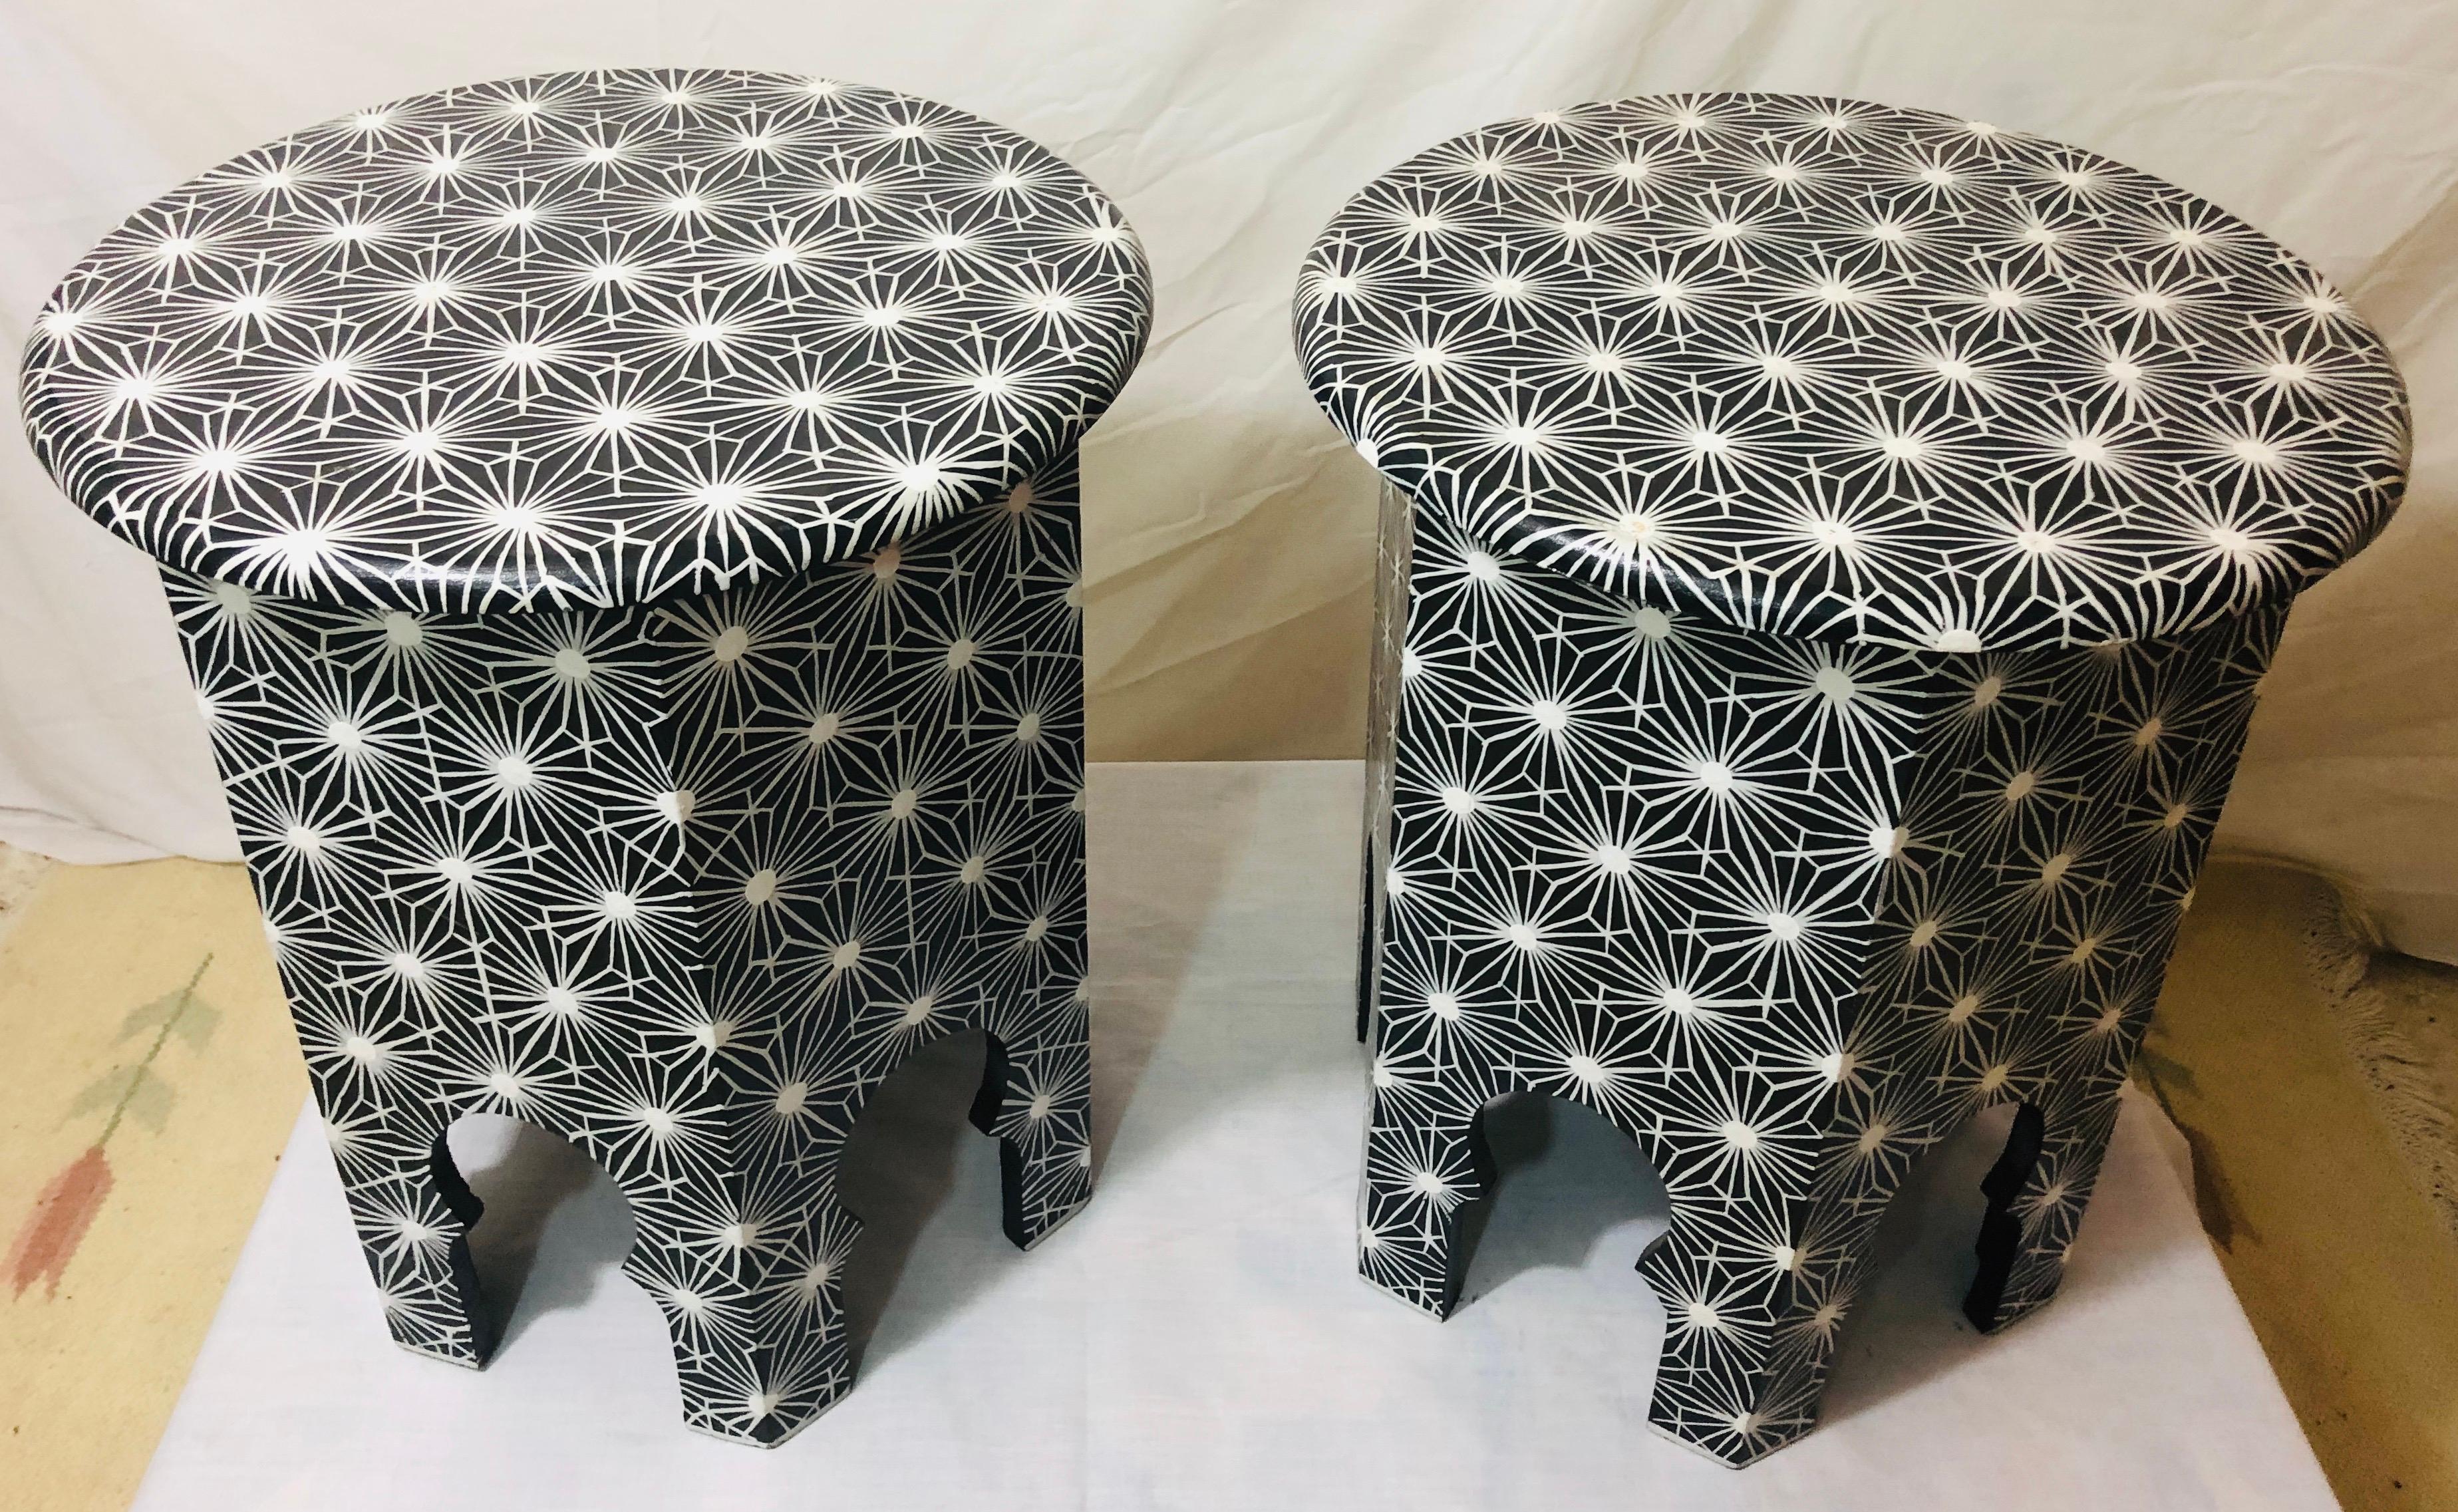 End, side or lamp table modern Moroccan in black and white, a pair

This stylish pair of black and white handmade side or end tables have beautiful arched base and features a modern overall design.

Dimensions: 17.5” D, 20” H.